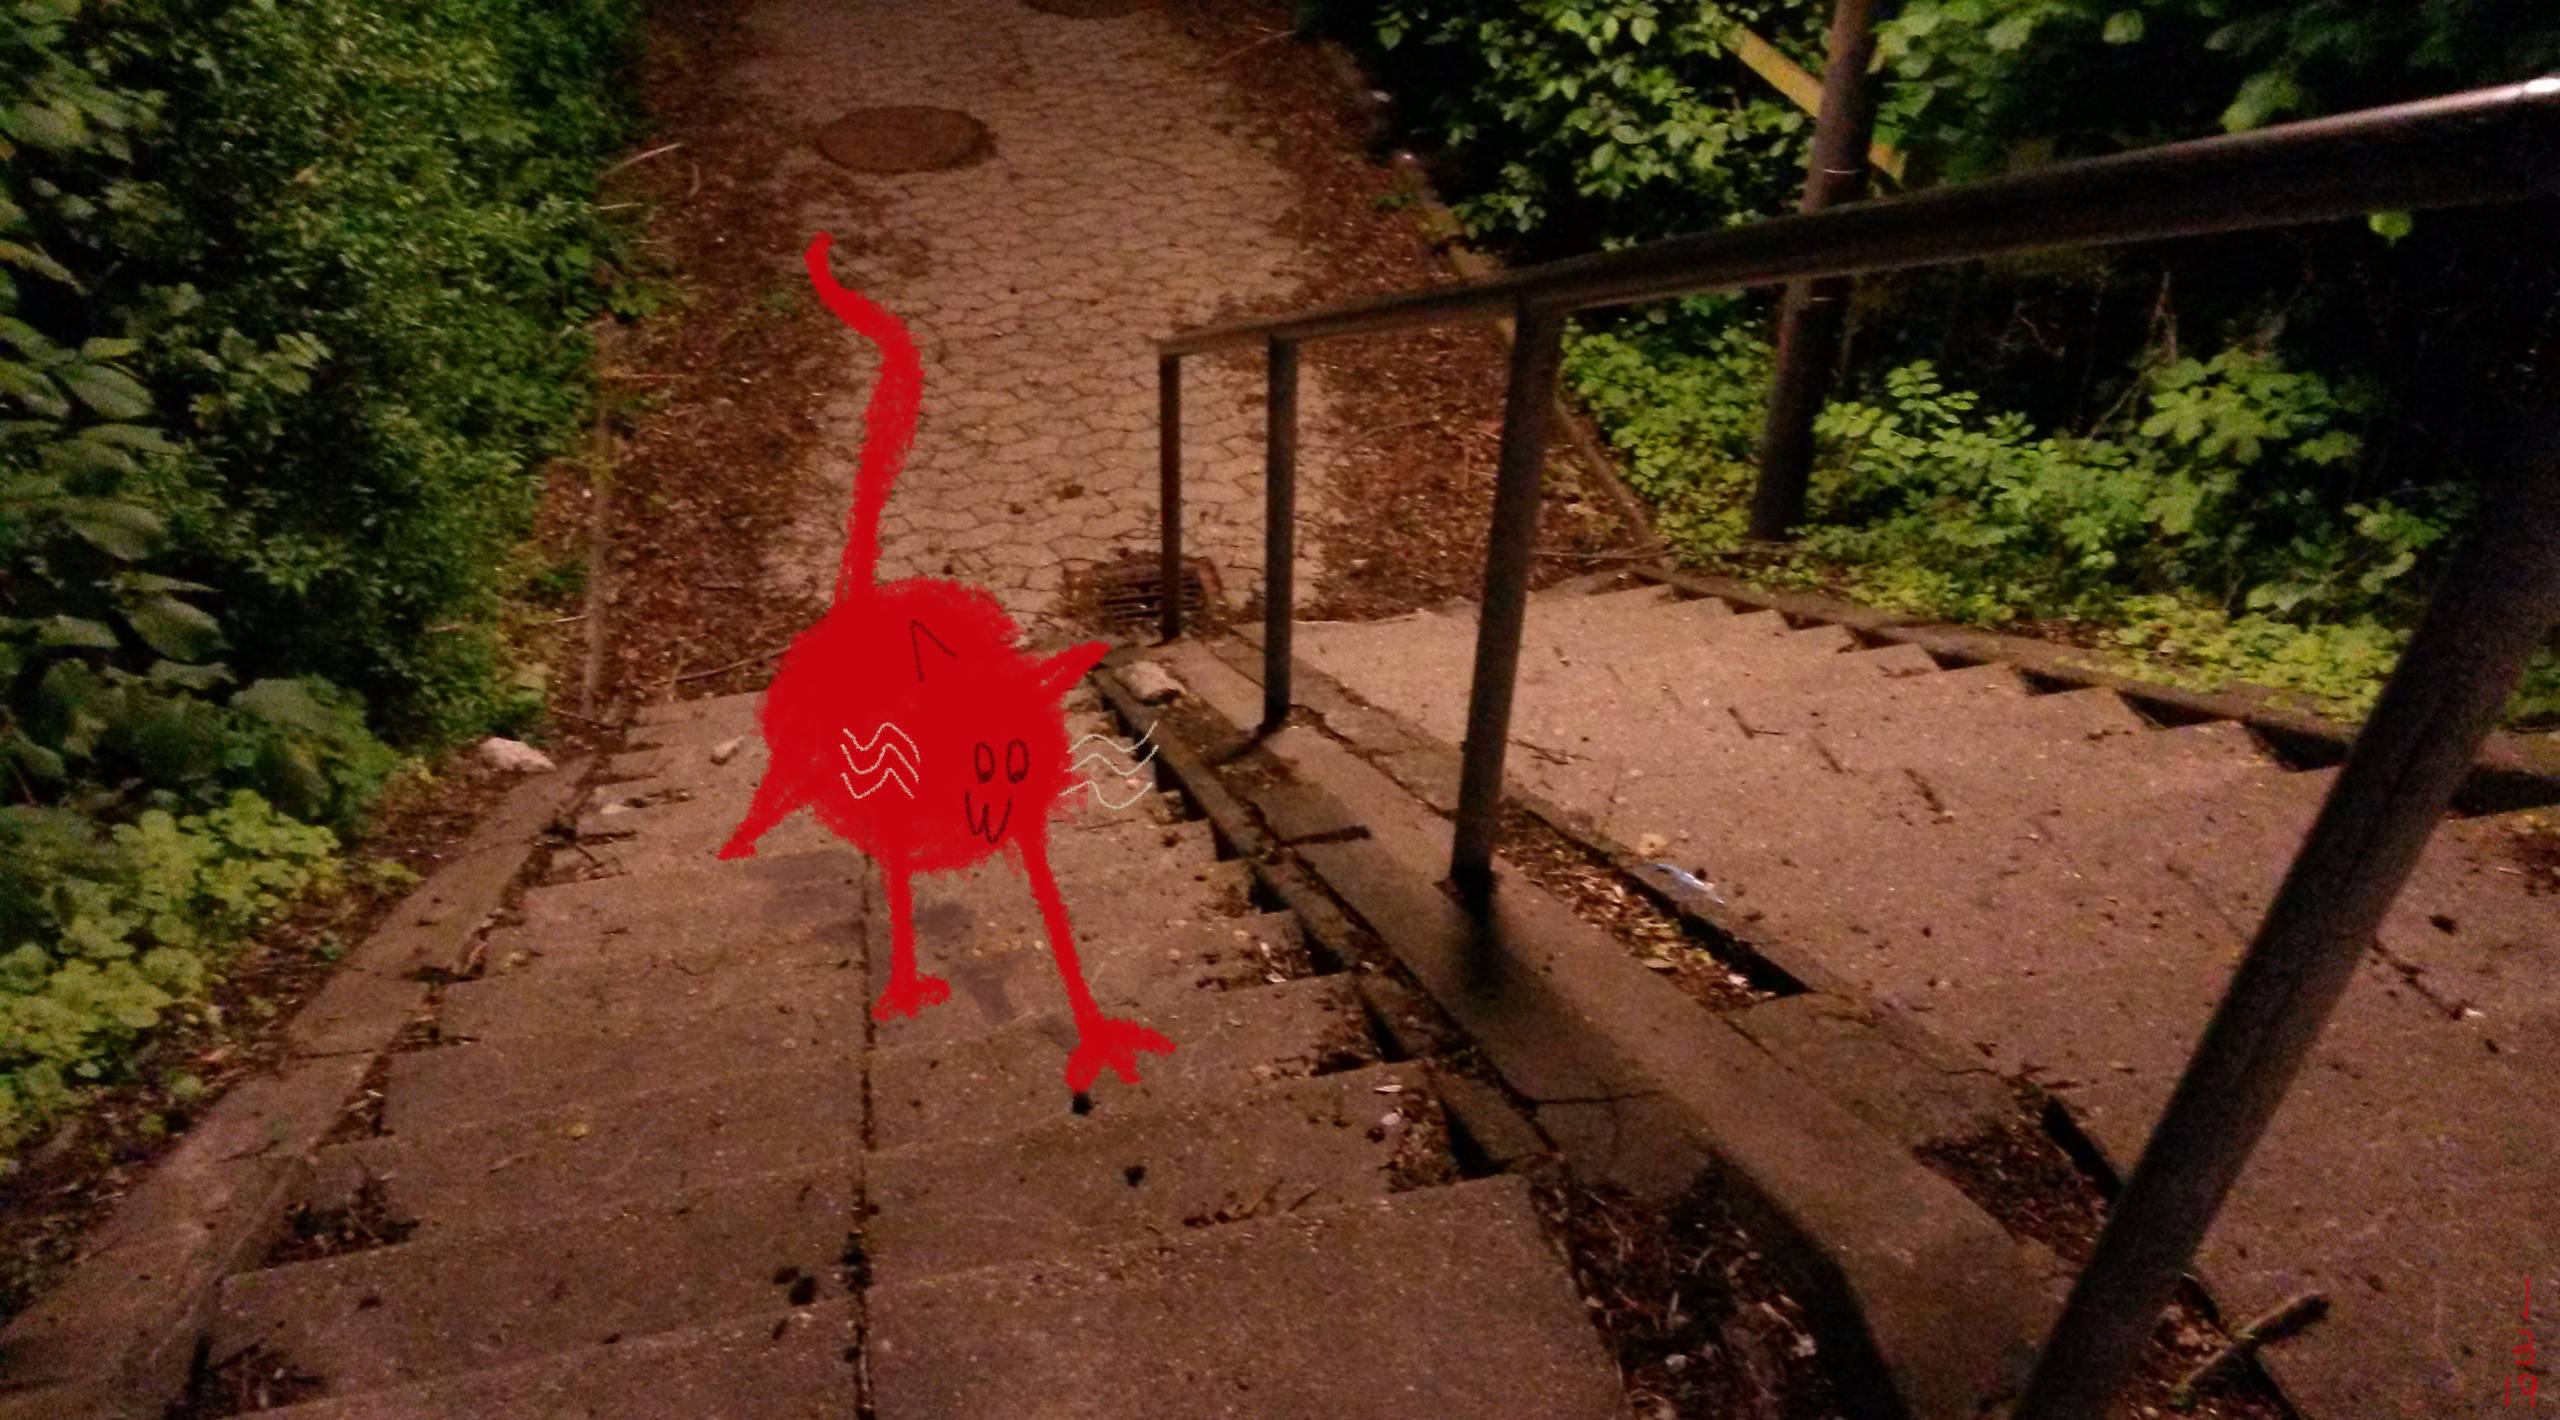 A simple red cat painted over a photo of some dark stone stairs surrounded by greenery and lit by a street lamp.